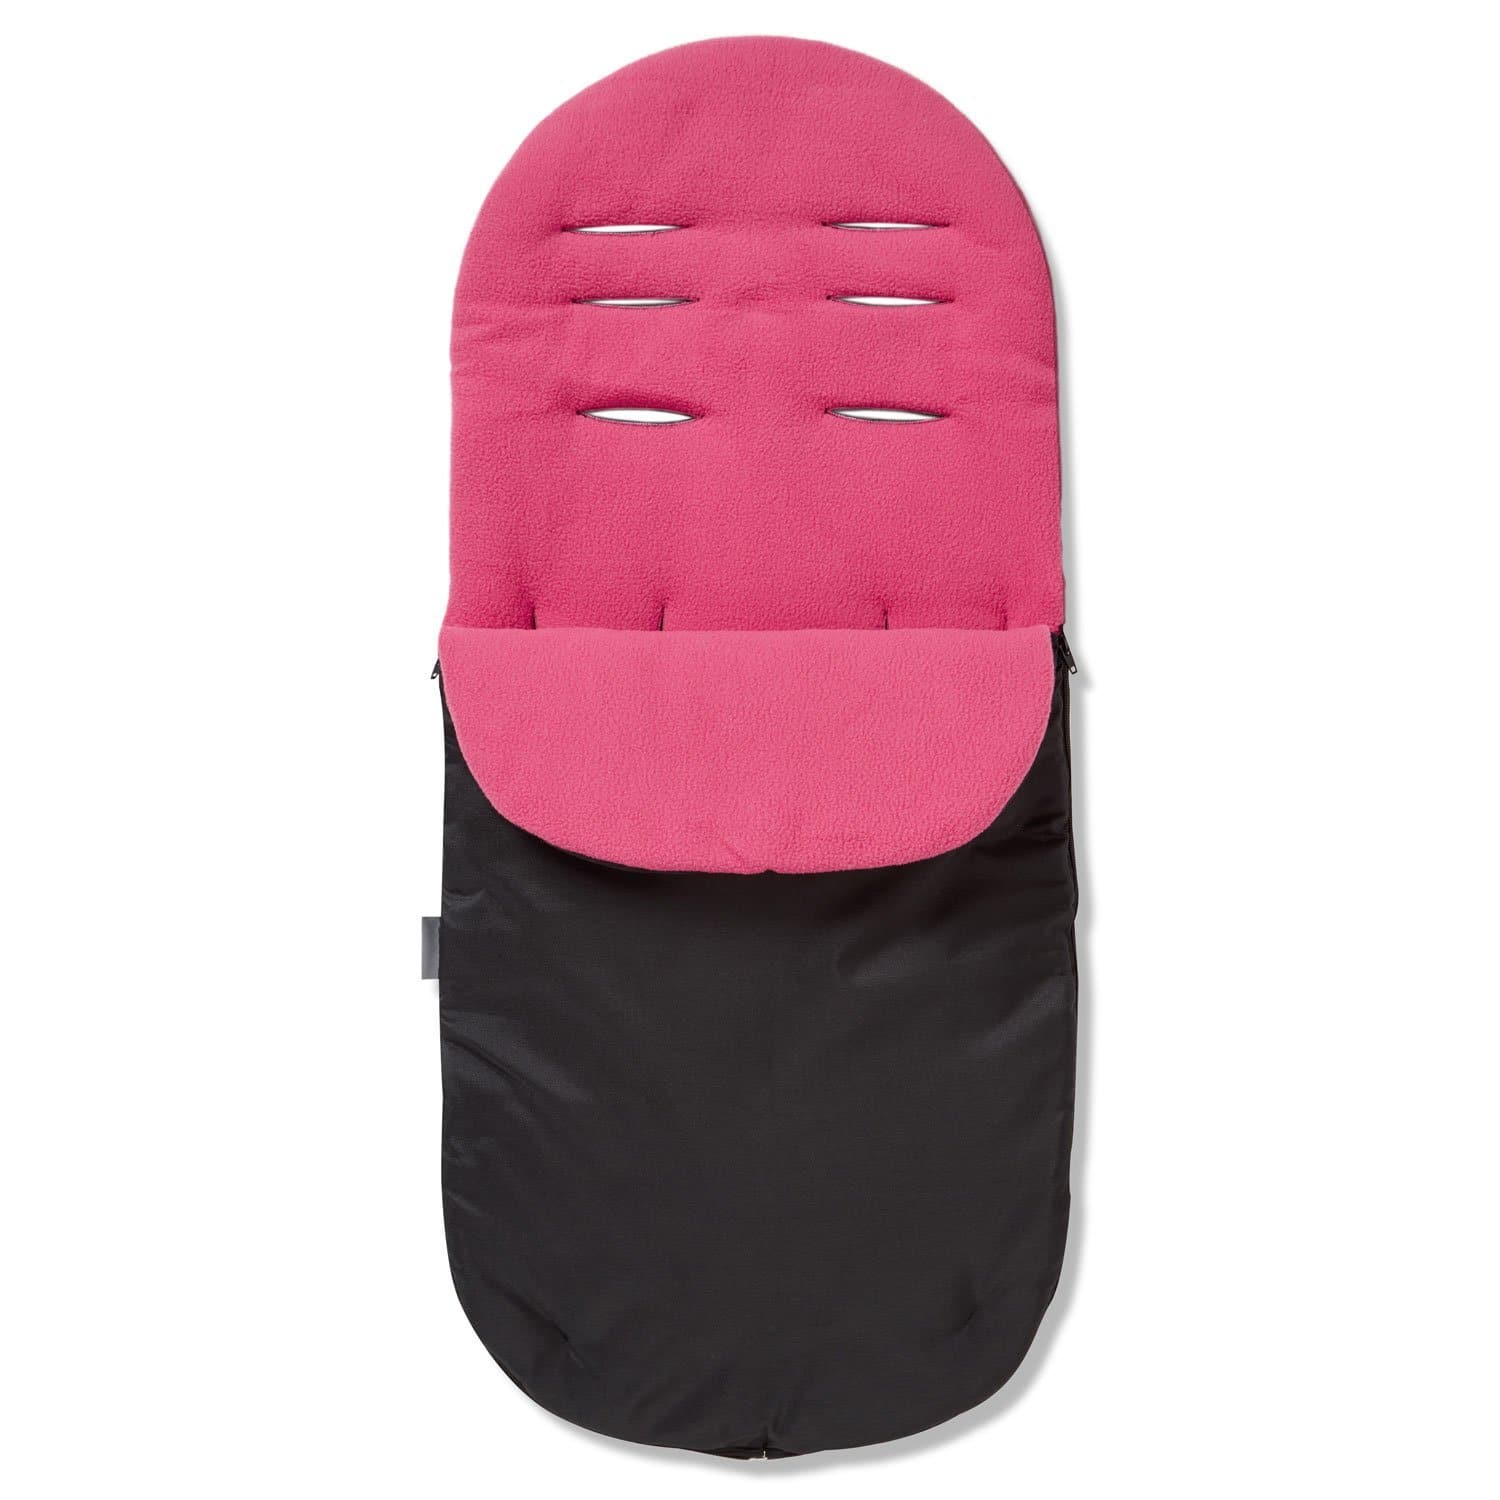 Footmuff / Cosy Toes Compatible with Emmaljunga - For Your Little One